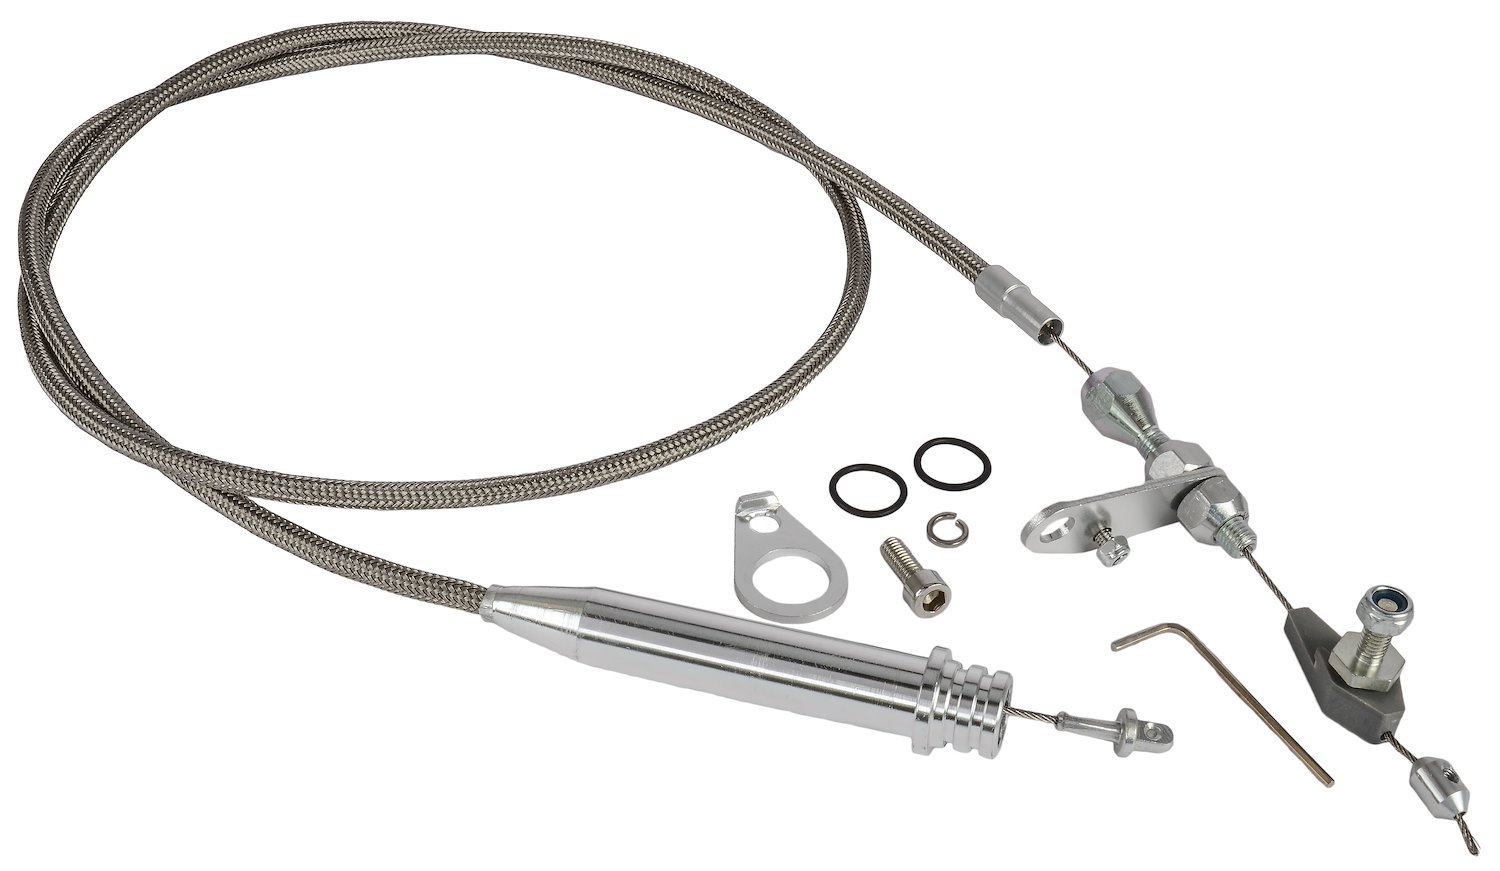 Transmission Kickdown Cable Kit [GMC/Chevy TH700-R4, Stainless Steel]